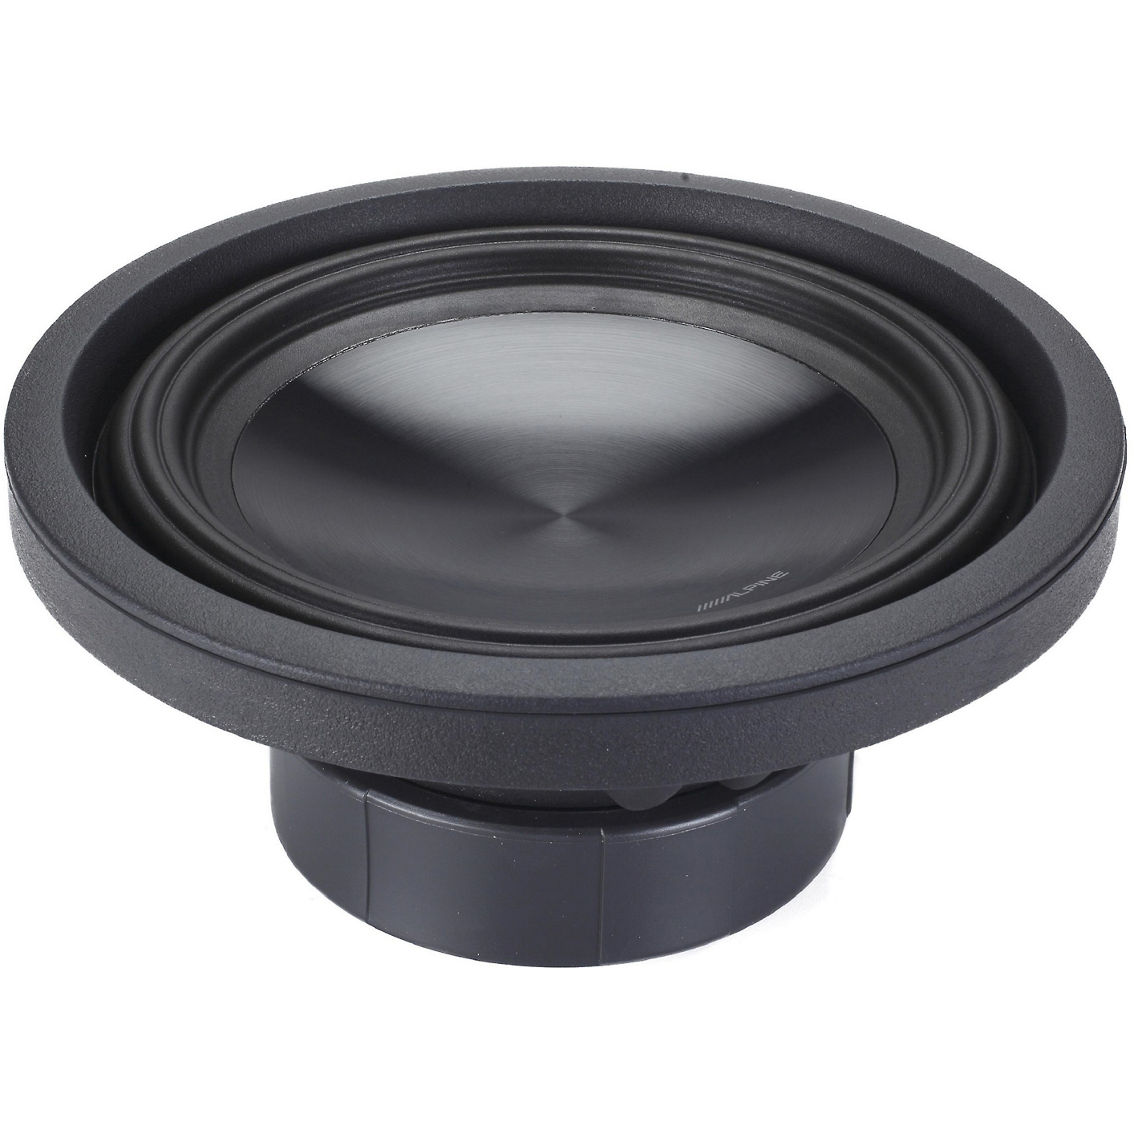 Alpine 10 in. Truck Subwoofer with 4-Ohm Voice Coil - Image 3 of 4